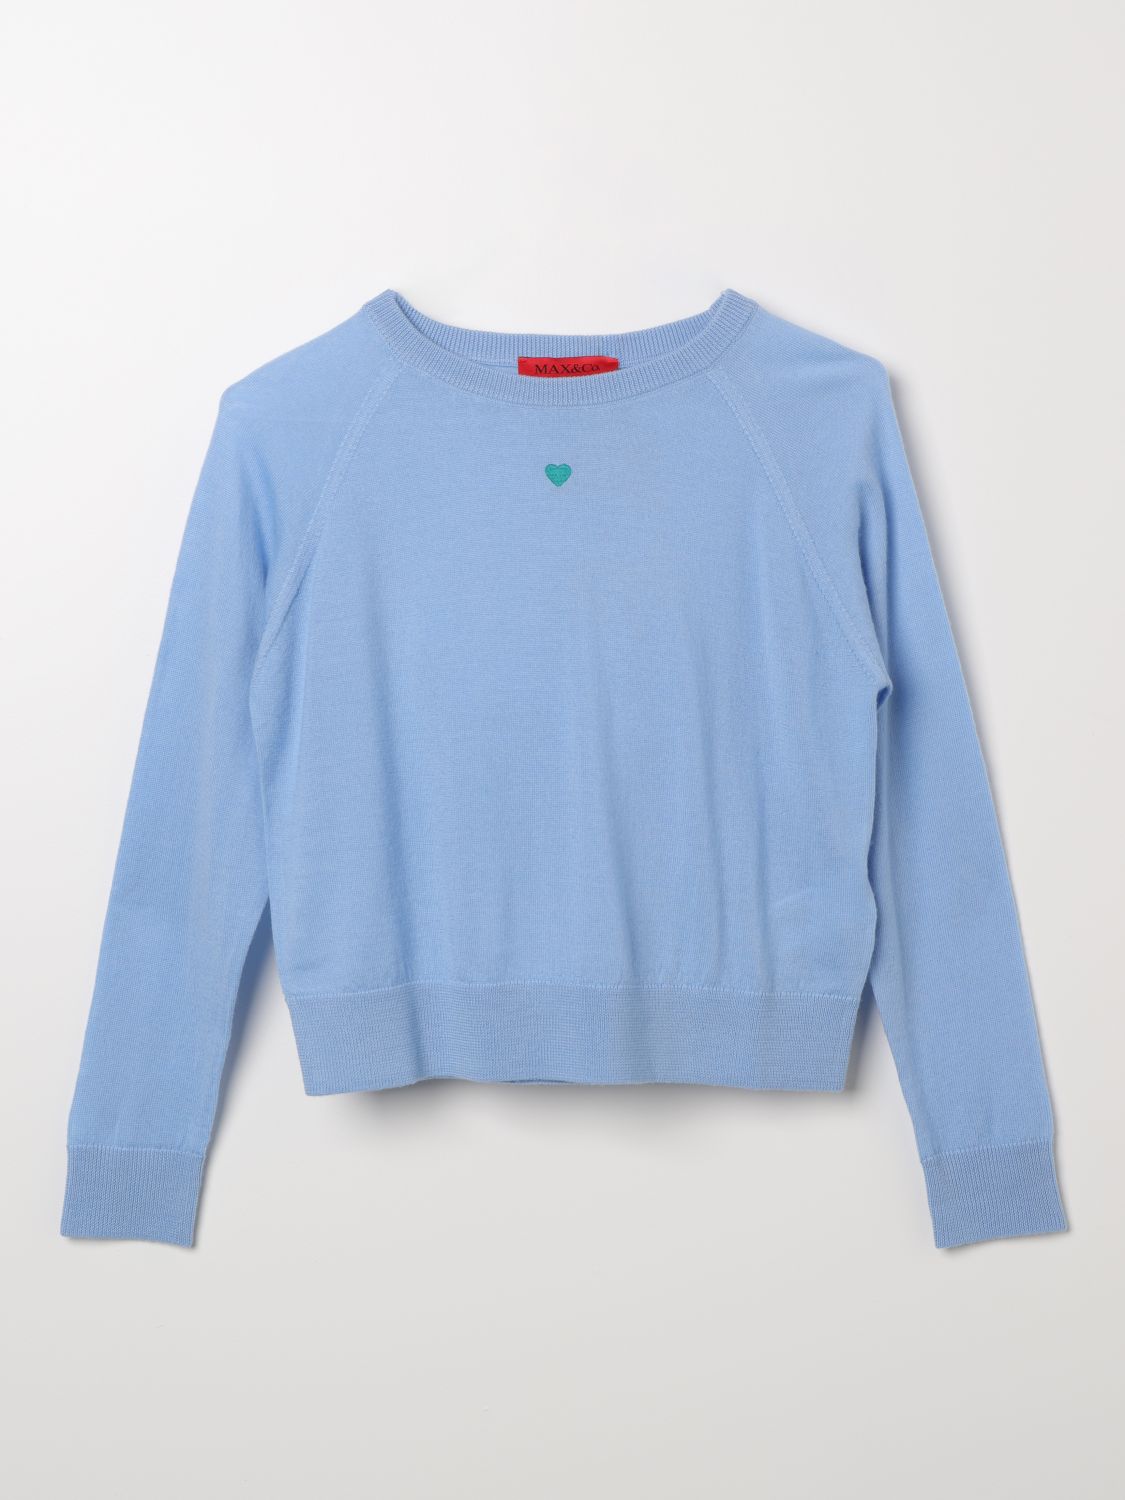 Max & Co. Kid Sweater  Kids Color Sky Blue